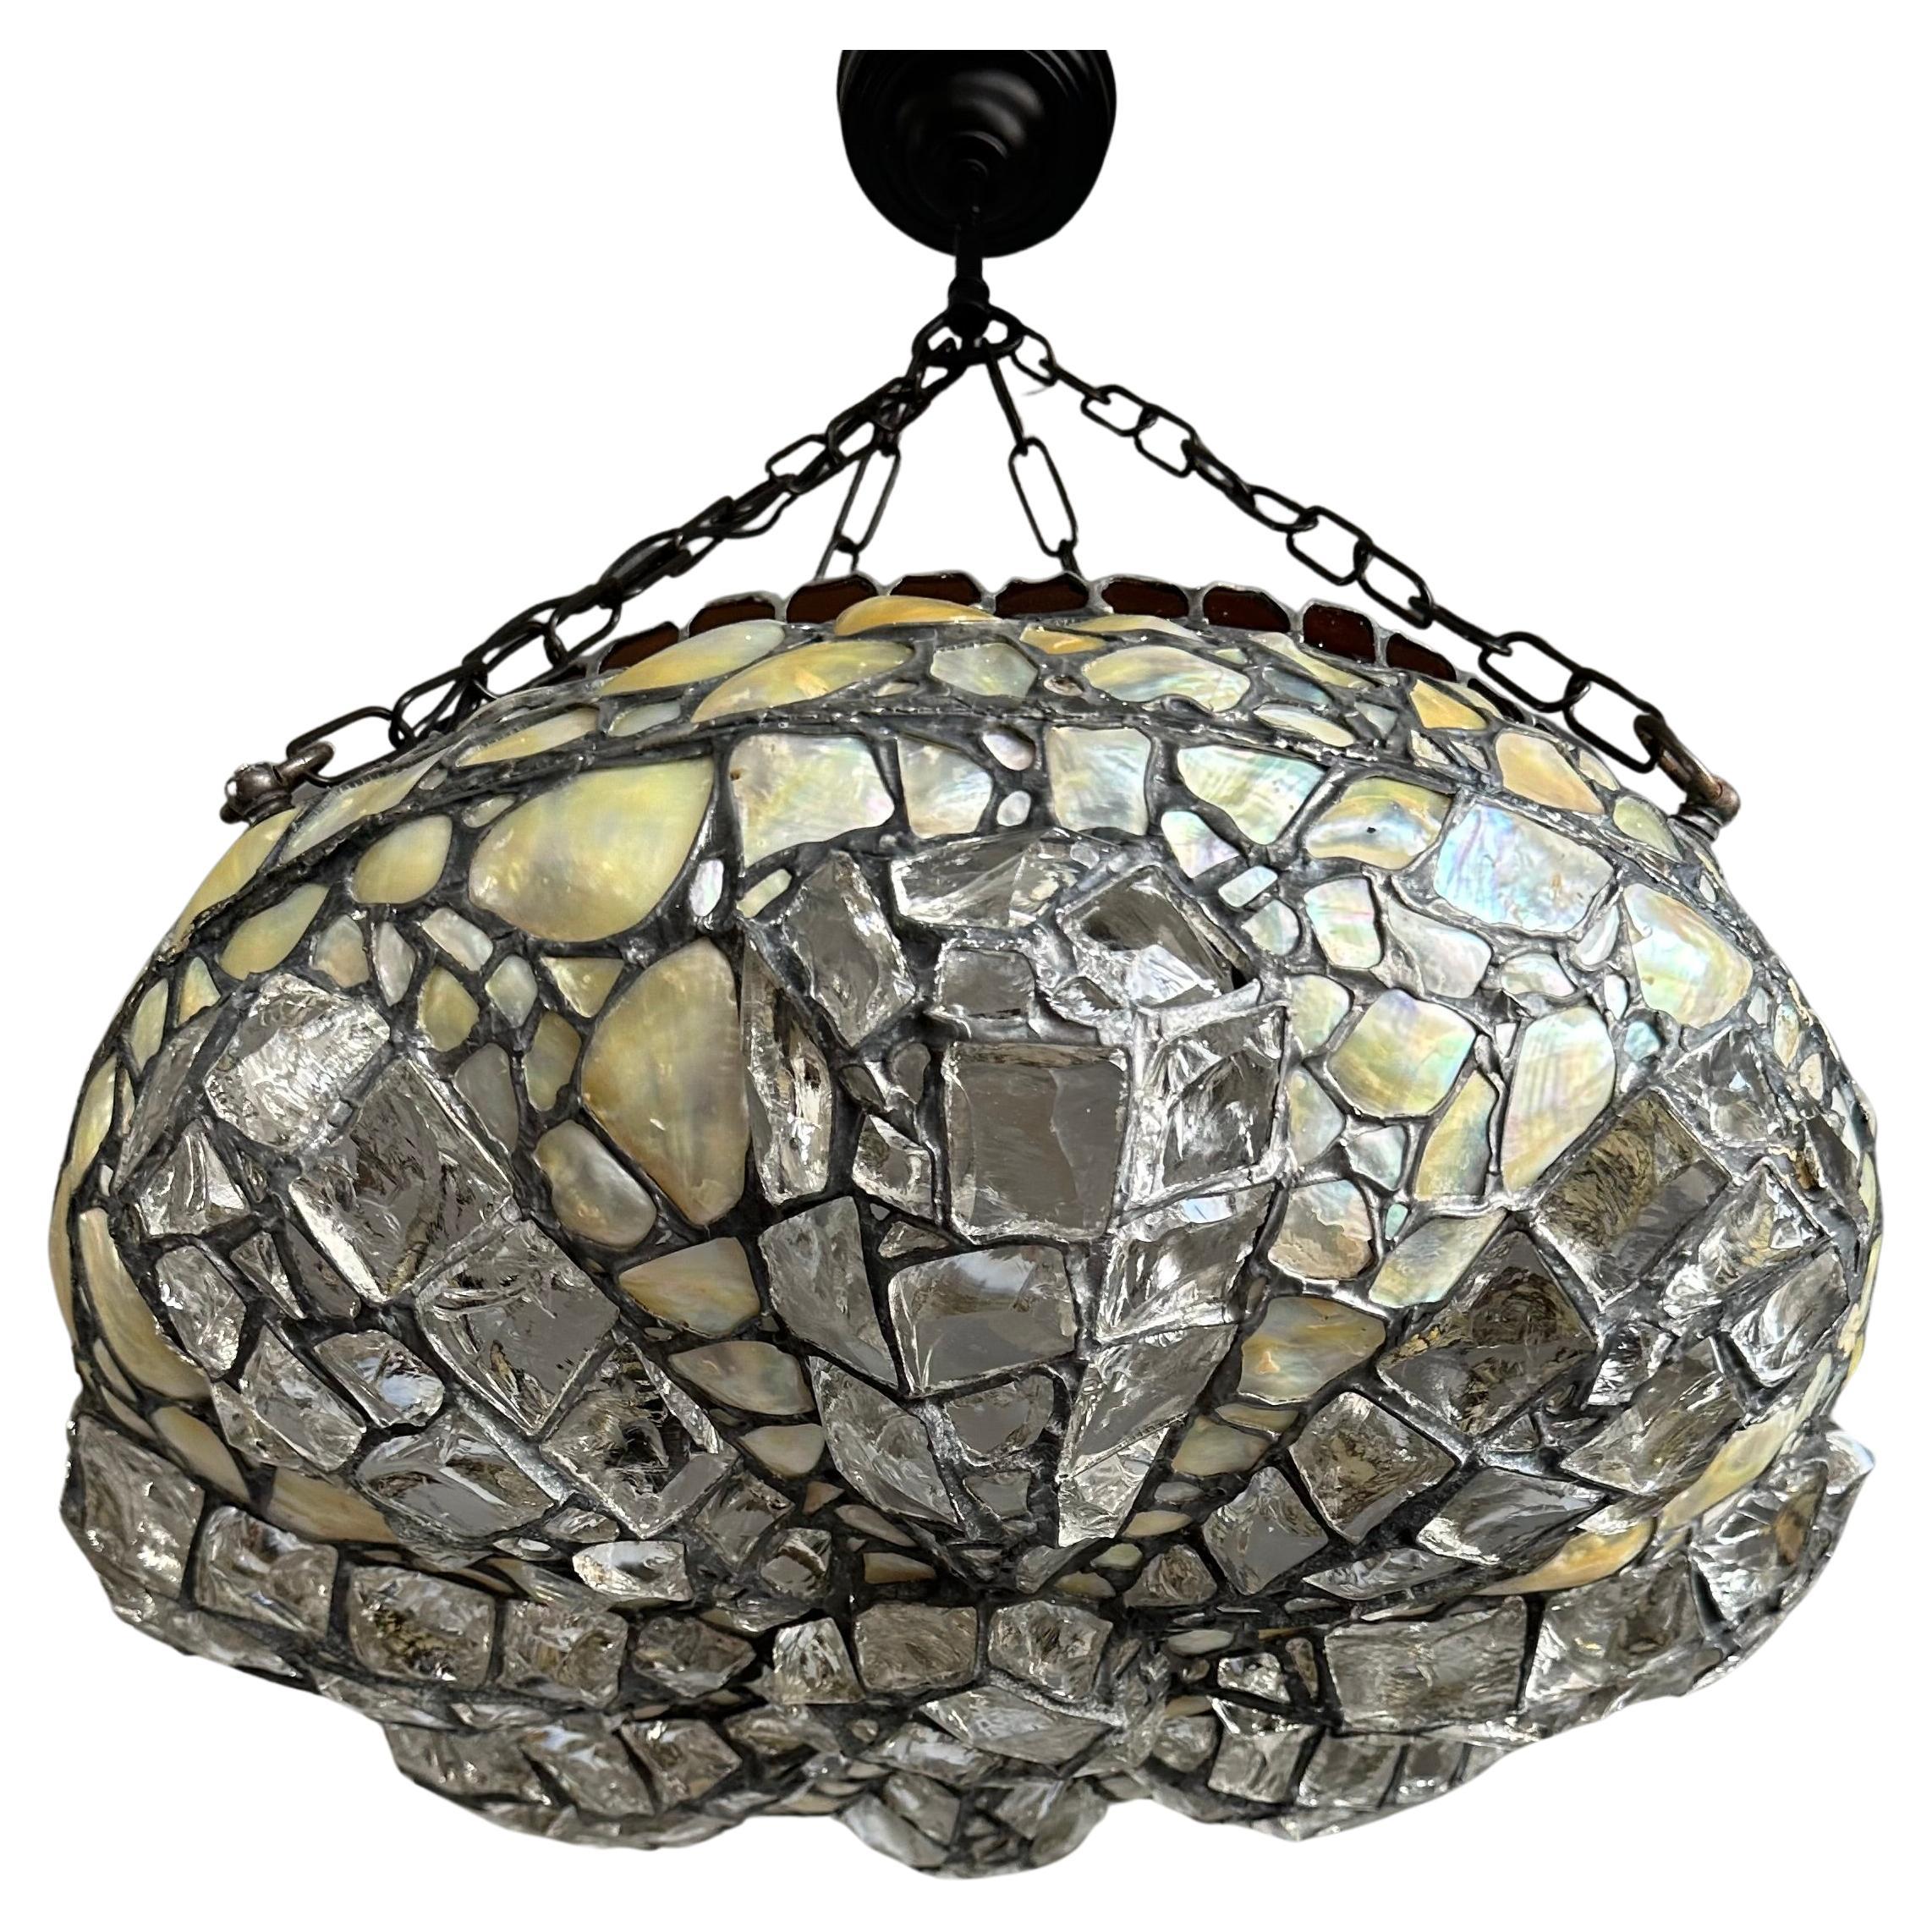 Rare inlaid 'chunky glass' light fixture from the early 1900s.

This handcrafted, chunky stained glass light fixture is the perfect blend of artistry and functionality. With early 20th century lighting being one of our specialities we are always